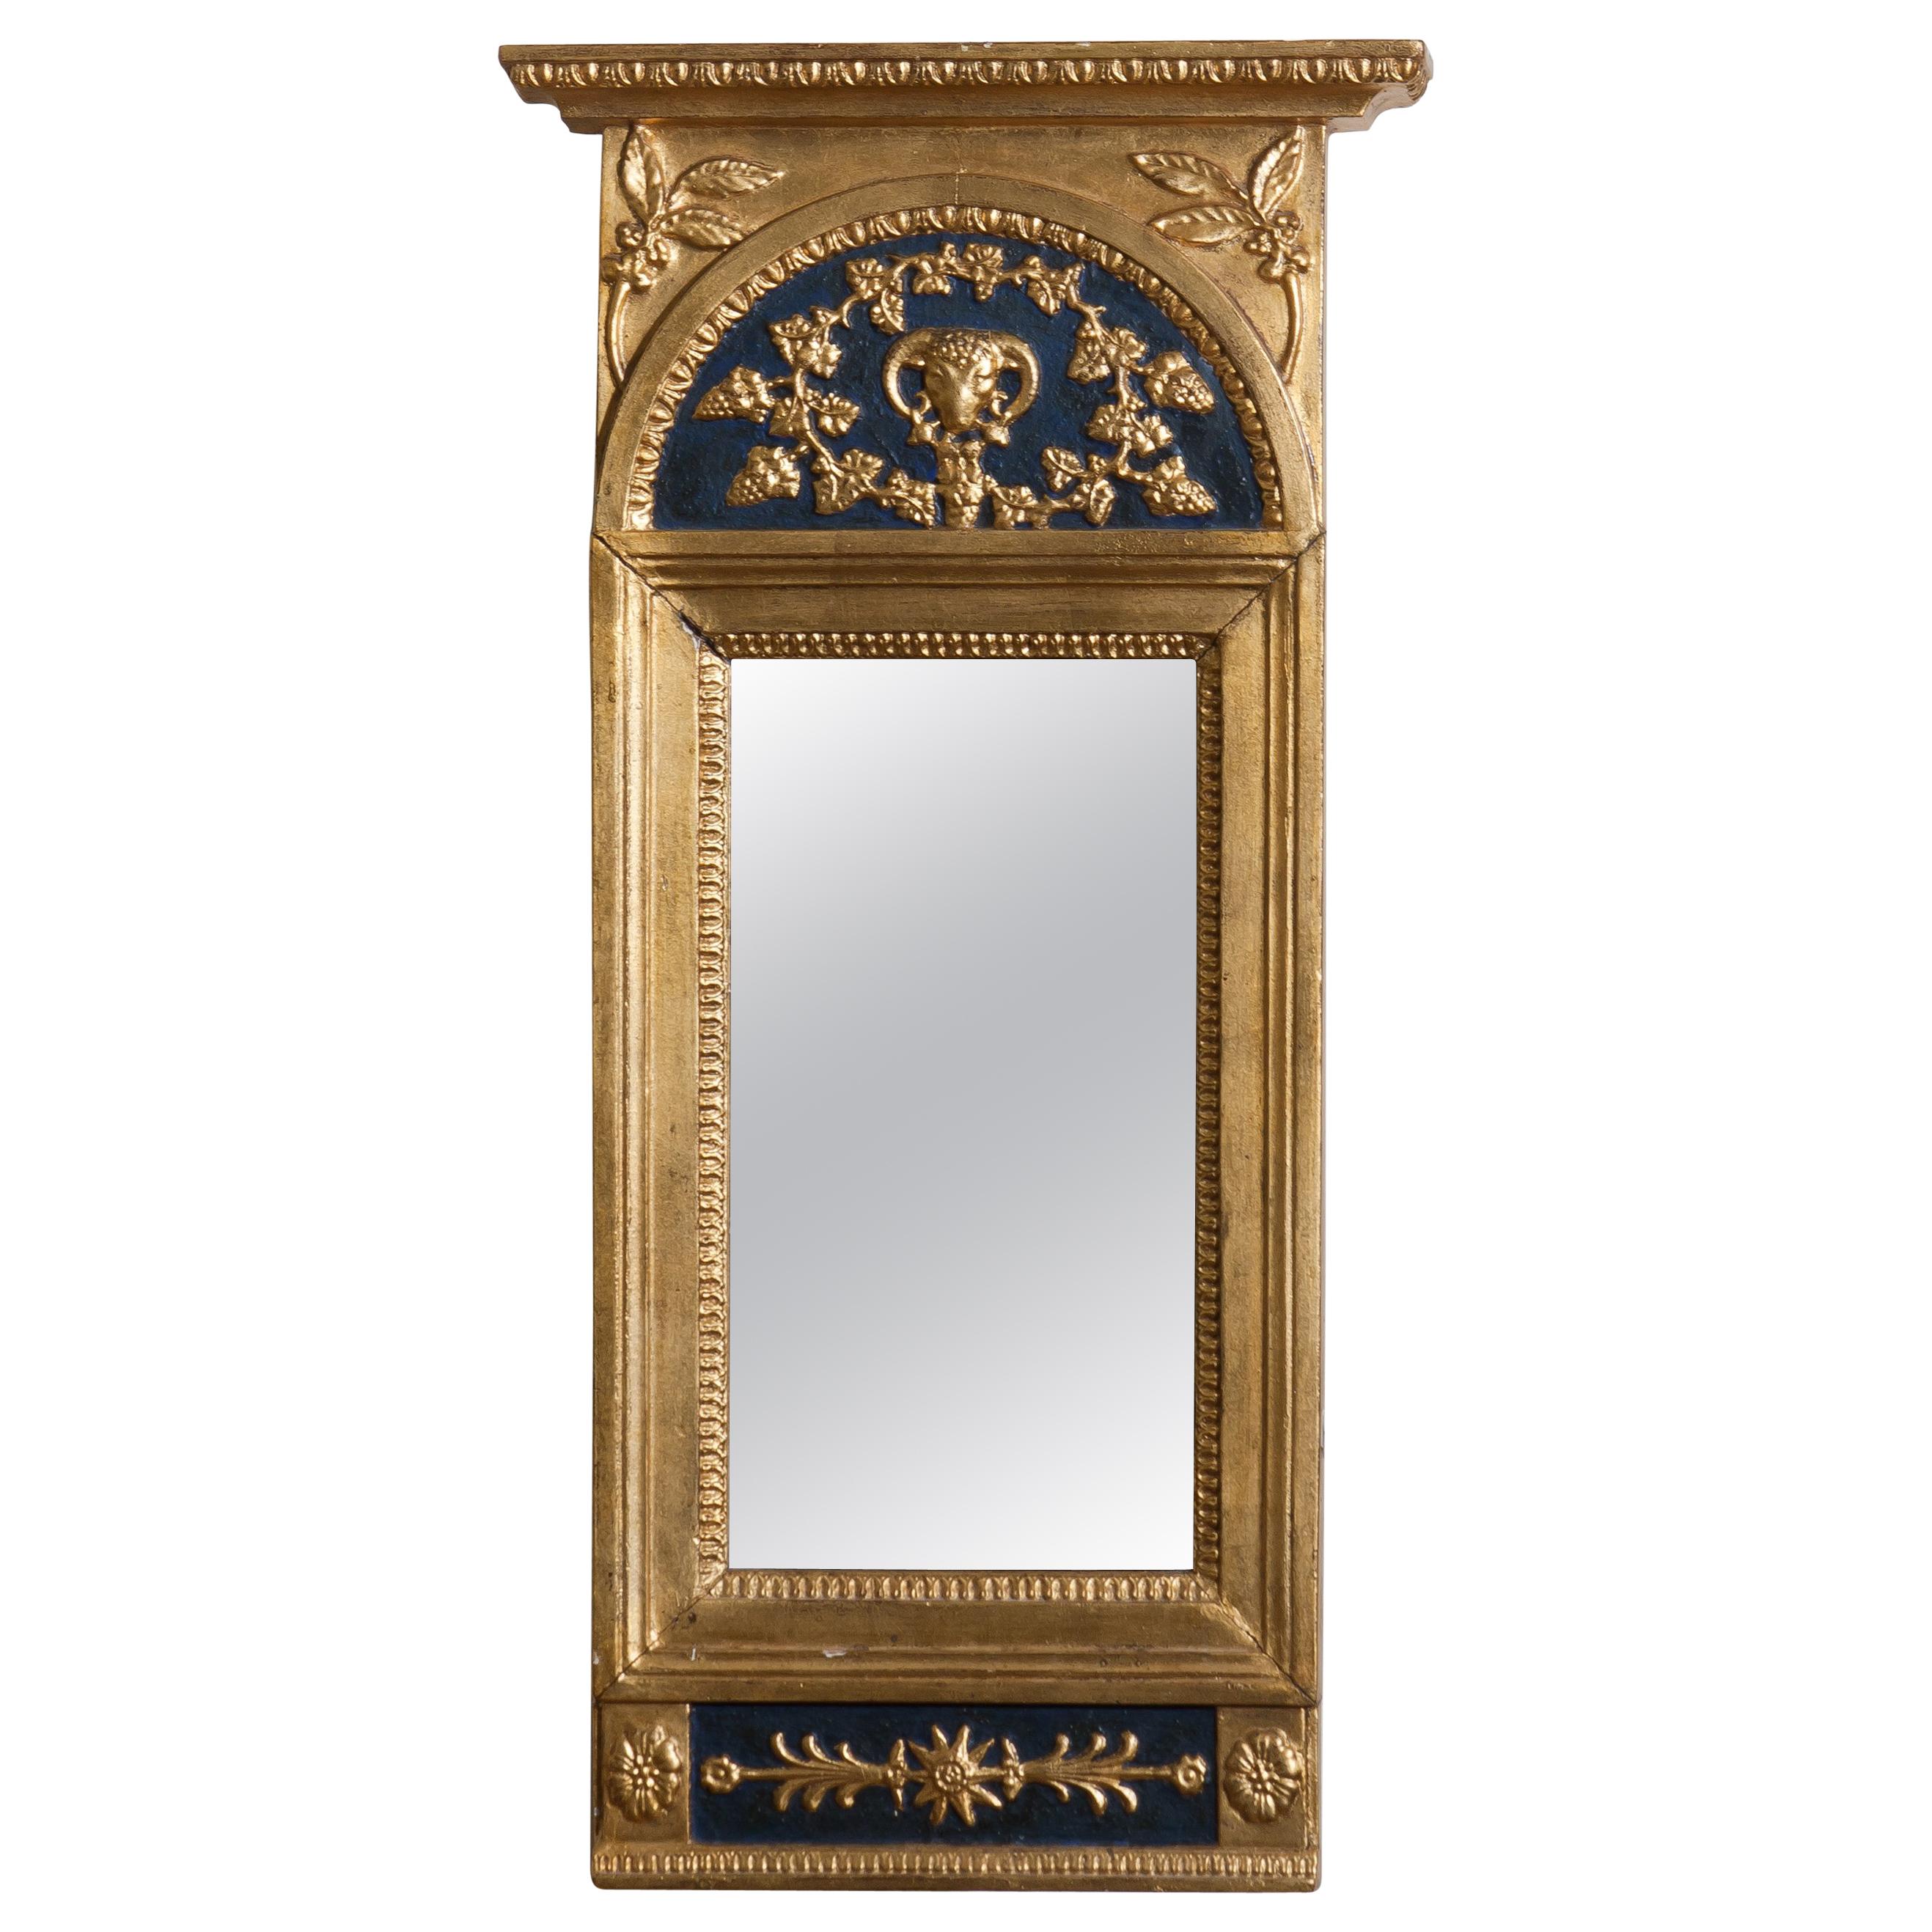 Gilded or panted Empire mirror, first half of the 1800s.
The mirror is in a later period restored and partly newly painted.
Overall condition is good. 
 